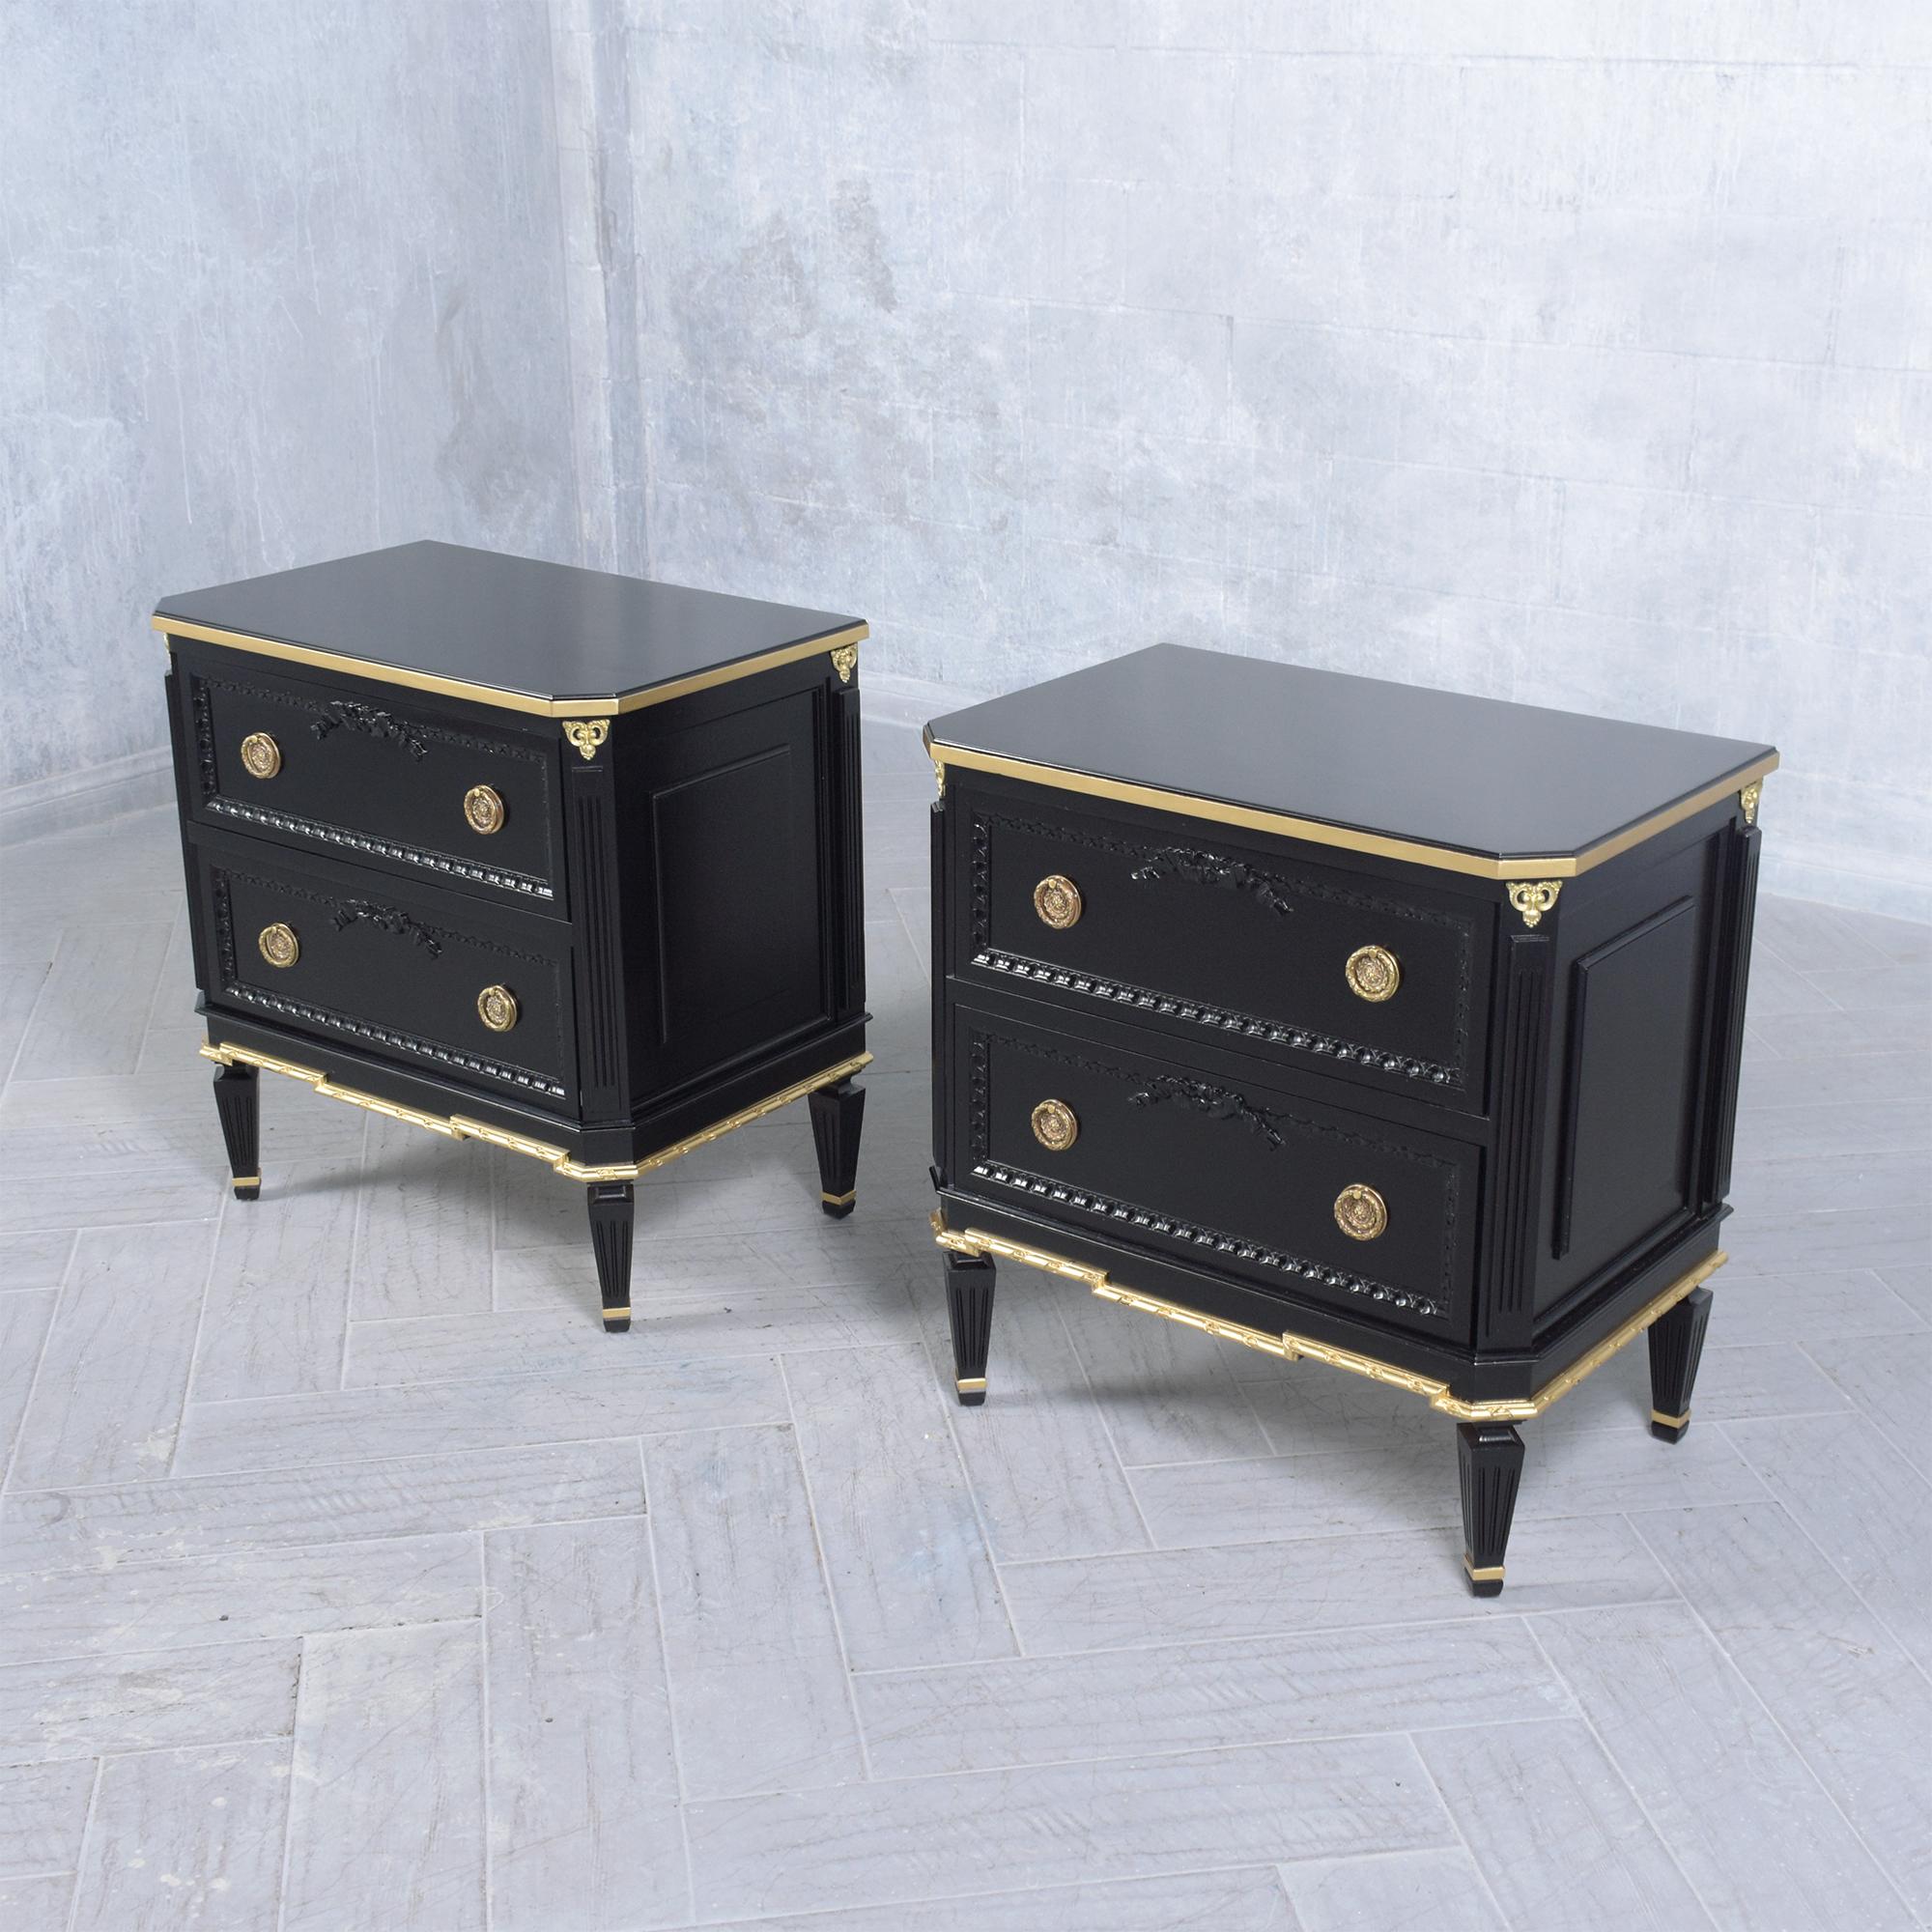 Brass Vintage Louis XVI Mahogany Commodes: Timeless Nightstands for the Modern Home